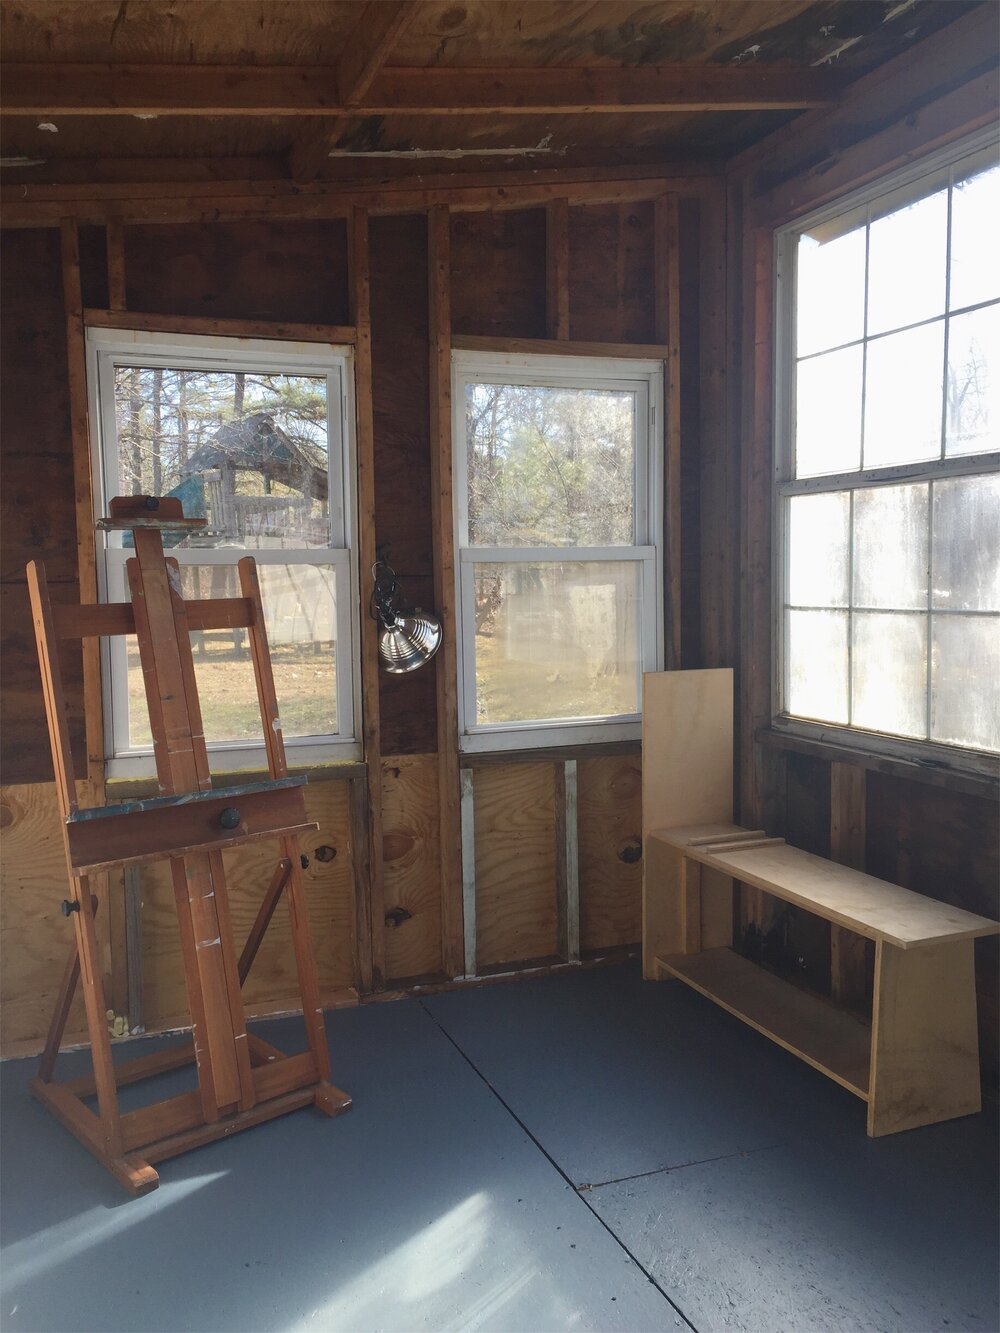 An old shed converted to an art studio.